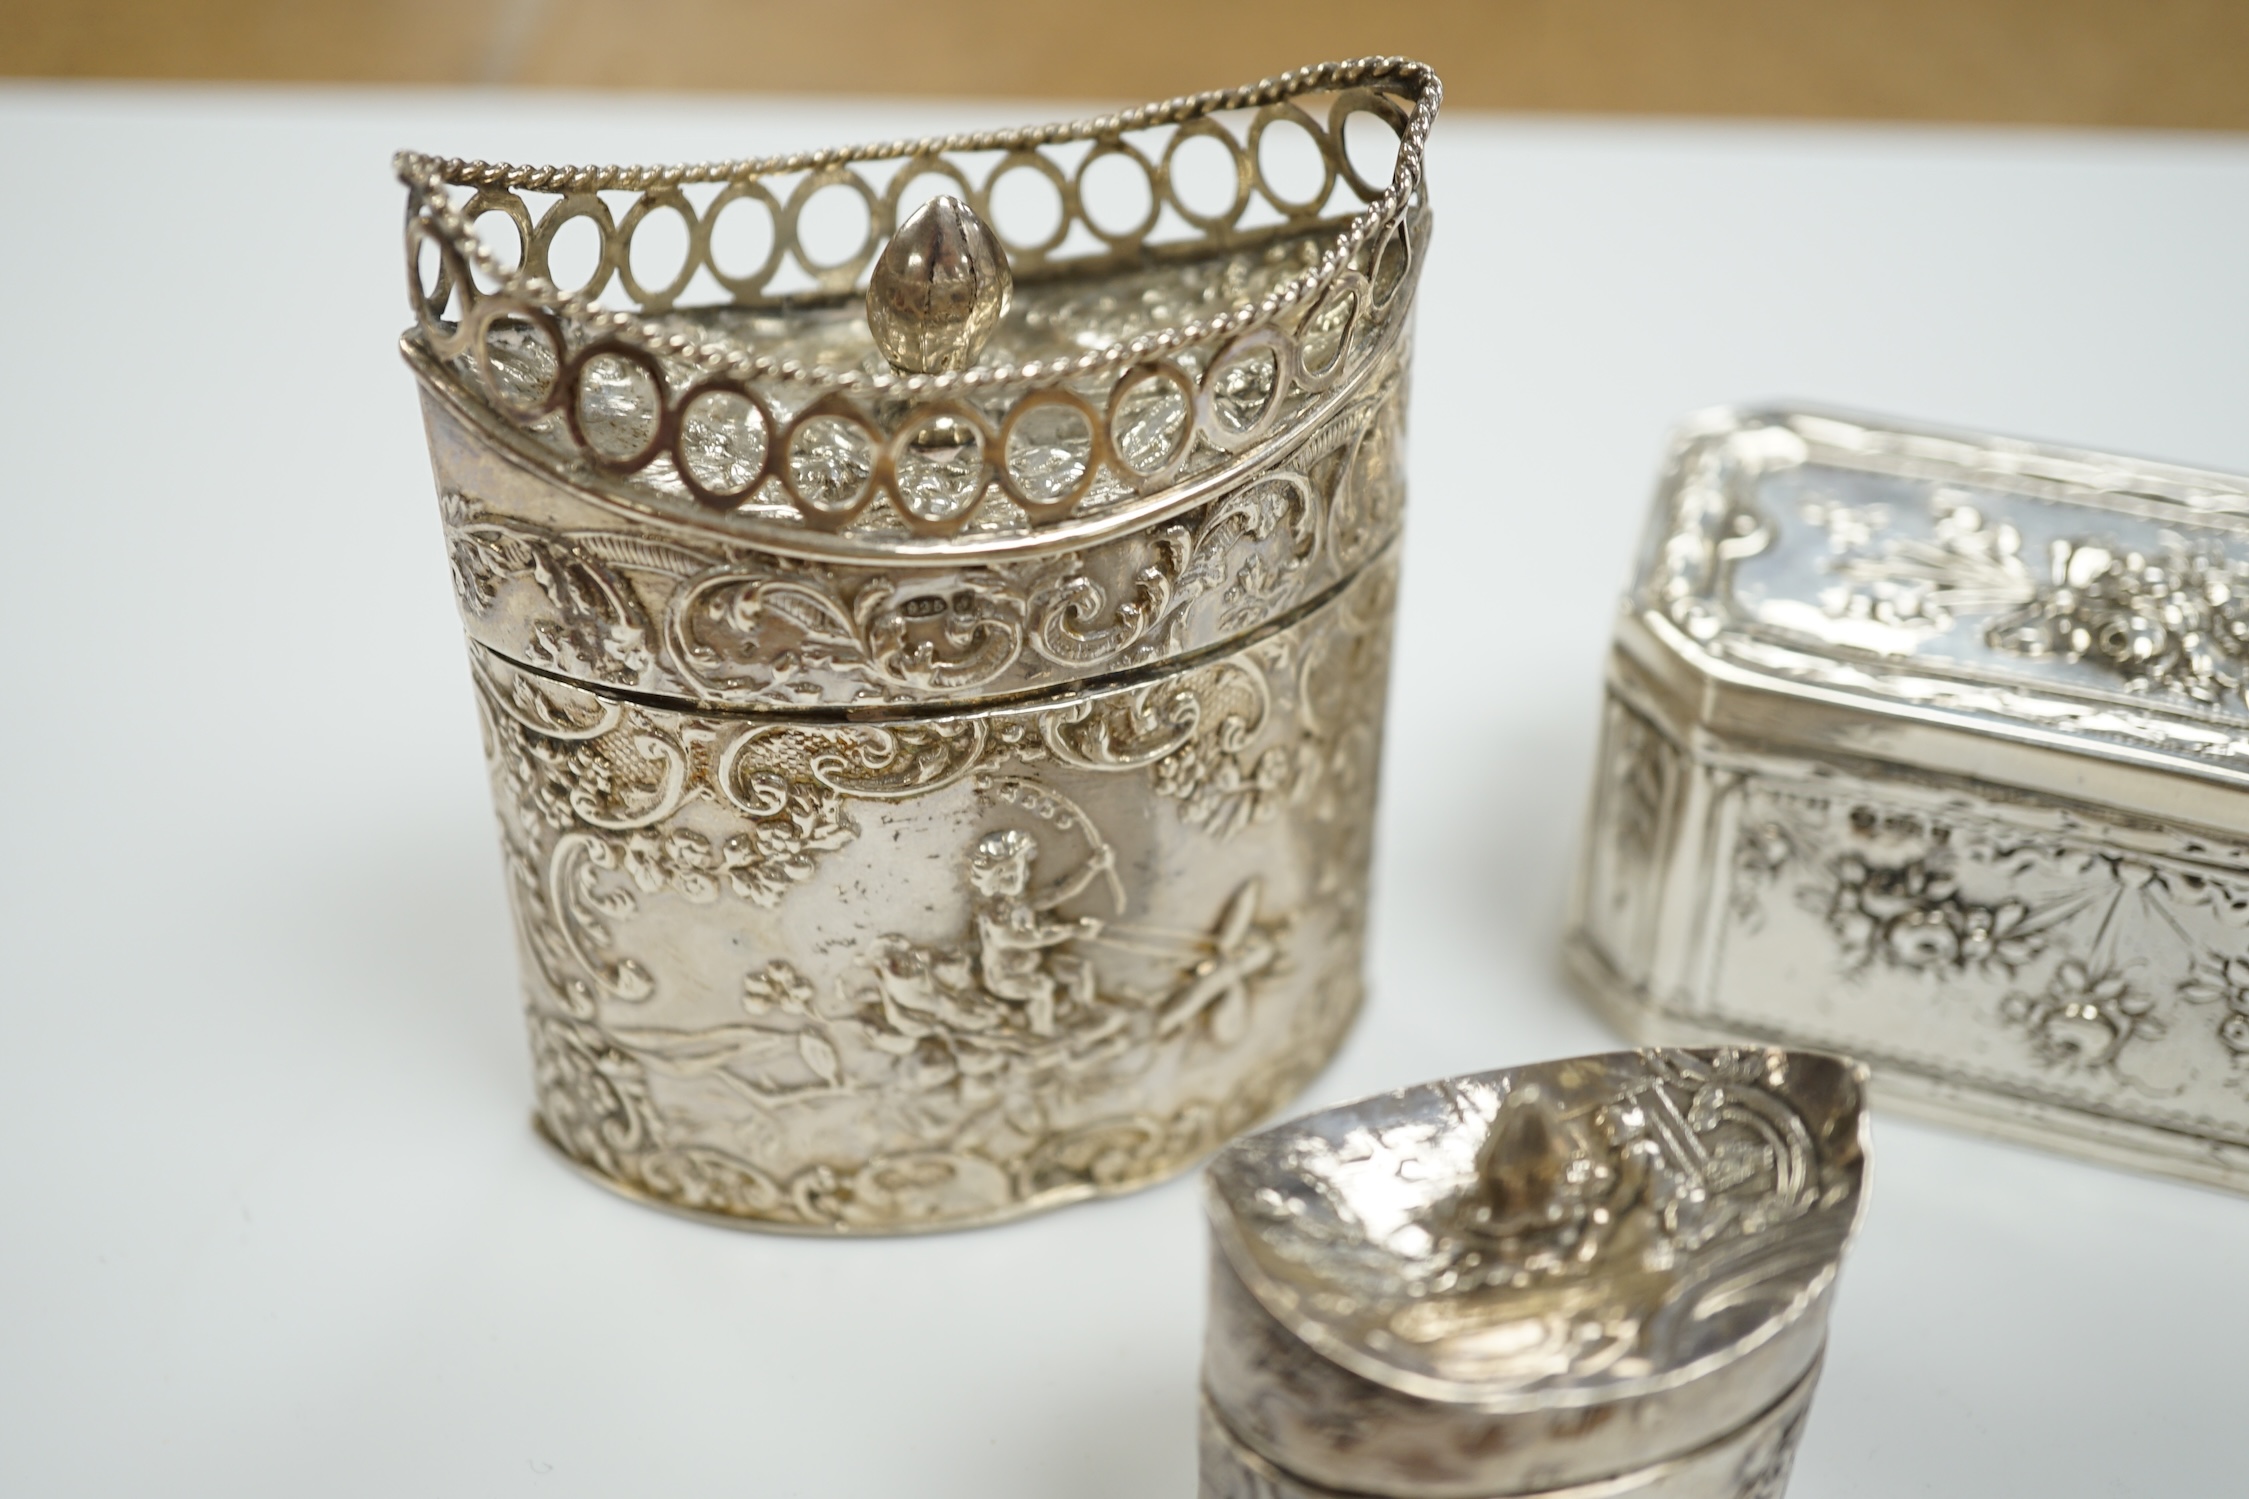 Three assorted late 19th century Dutch white metal boxes, largest 80mm.